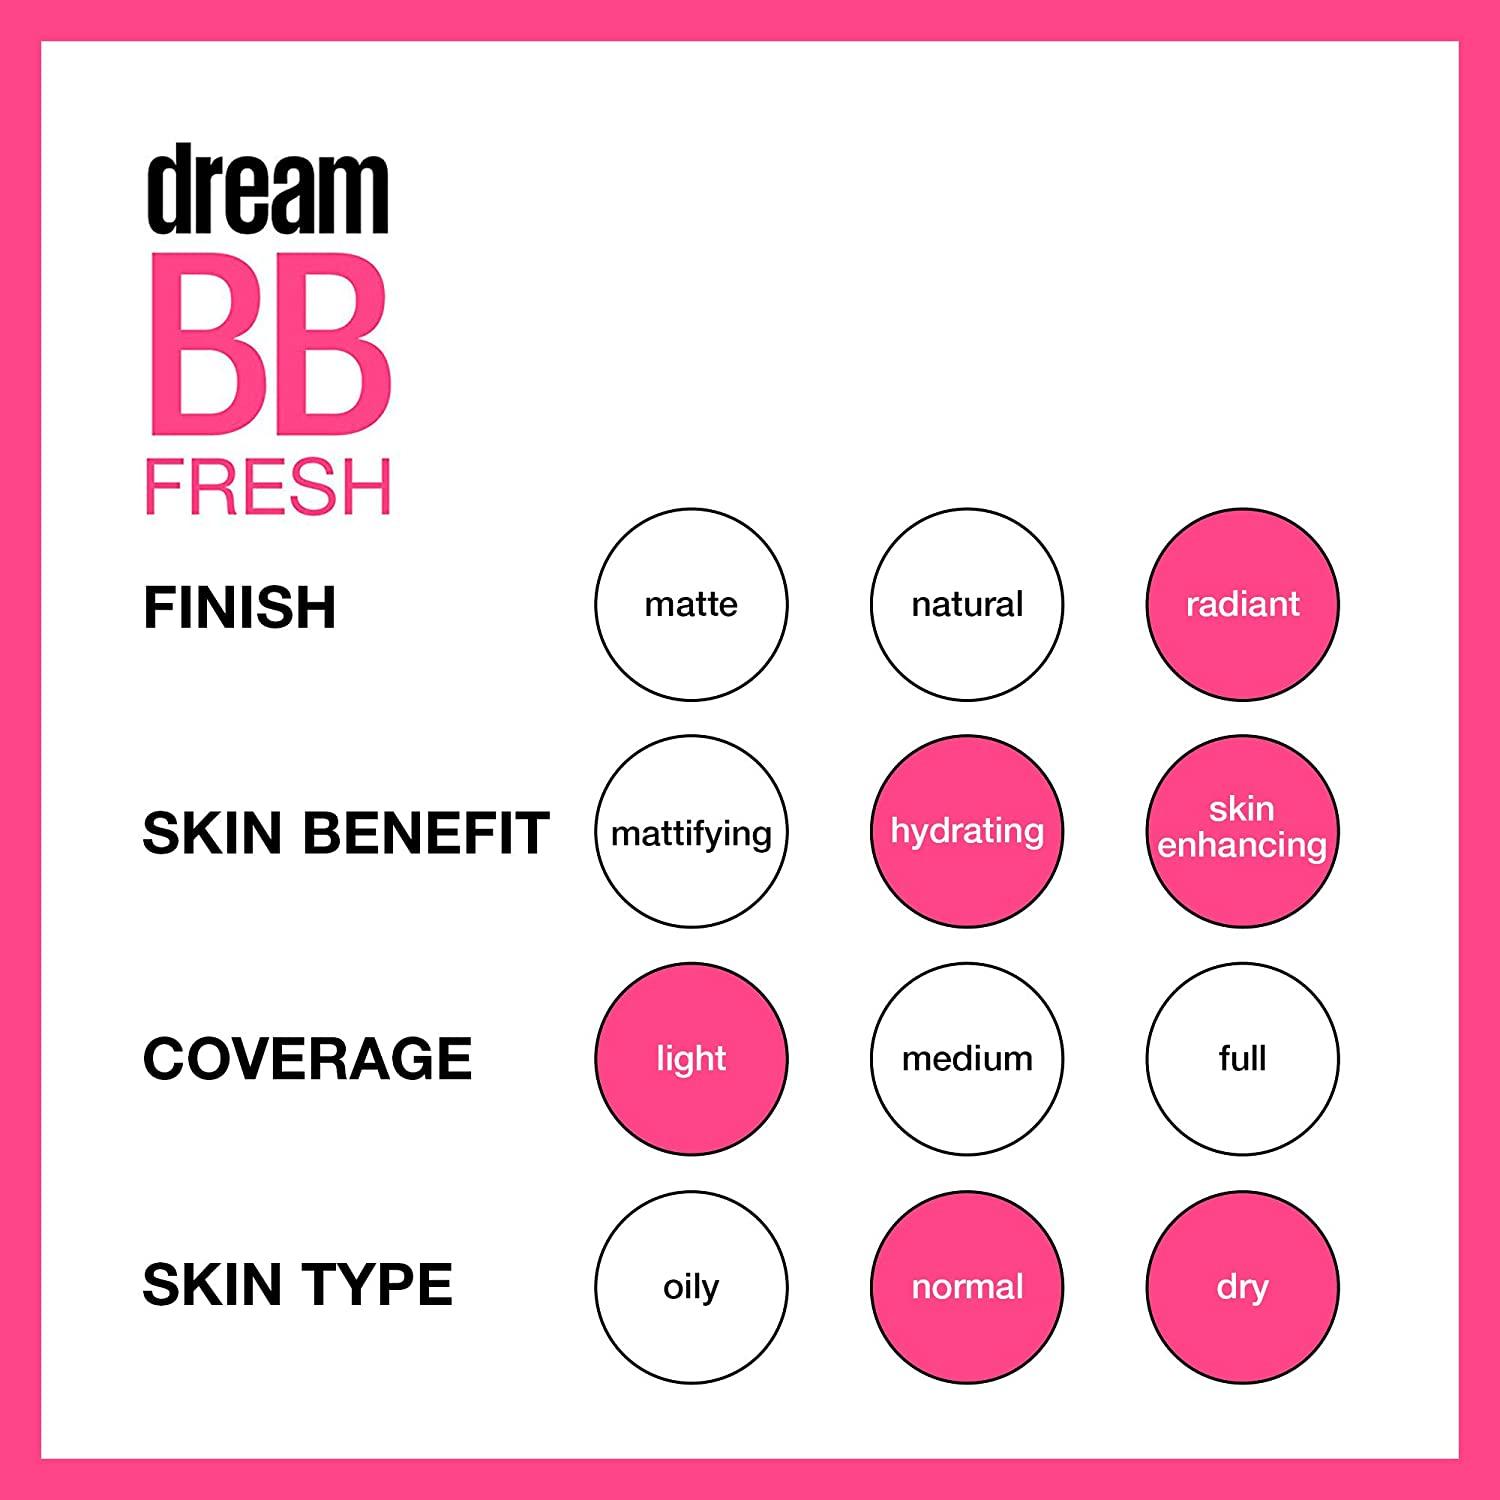  Maybelline Dream Fresh Skin Hydrating BB cream, 8-in-1 Skin  Perfecting Beauty Balm with Broad Spectrum SPF 30, Sheer Tint Coverage,  Oil-Free, Light/Medium, 1 Fl Oz : Beauty & Personal Care